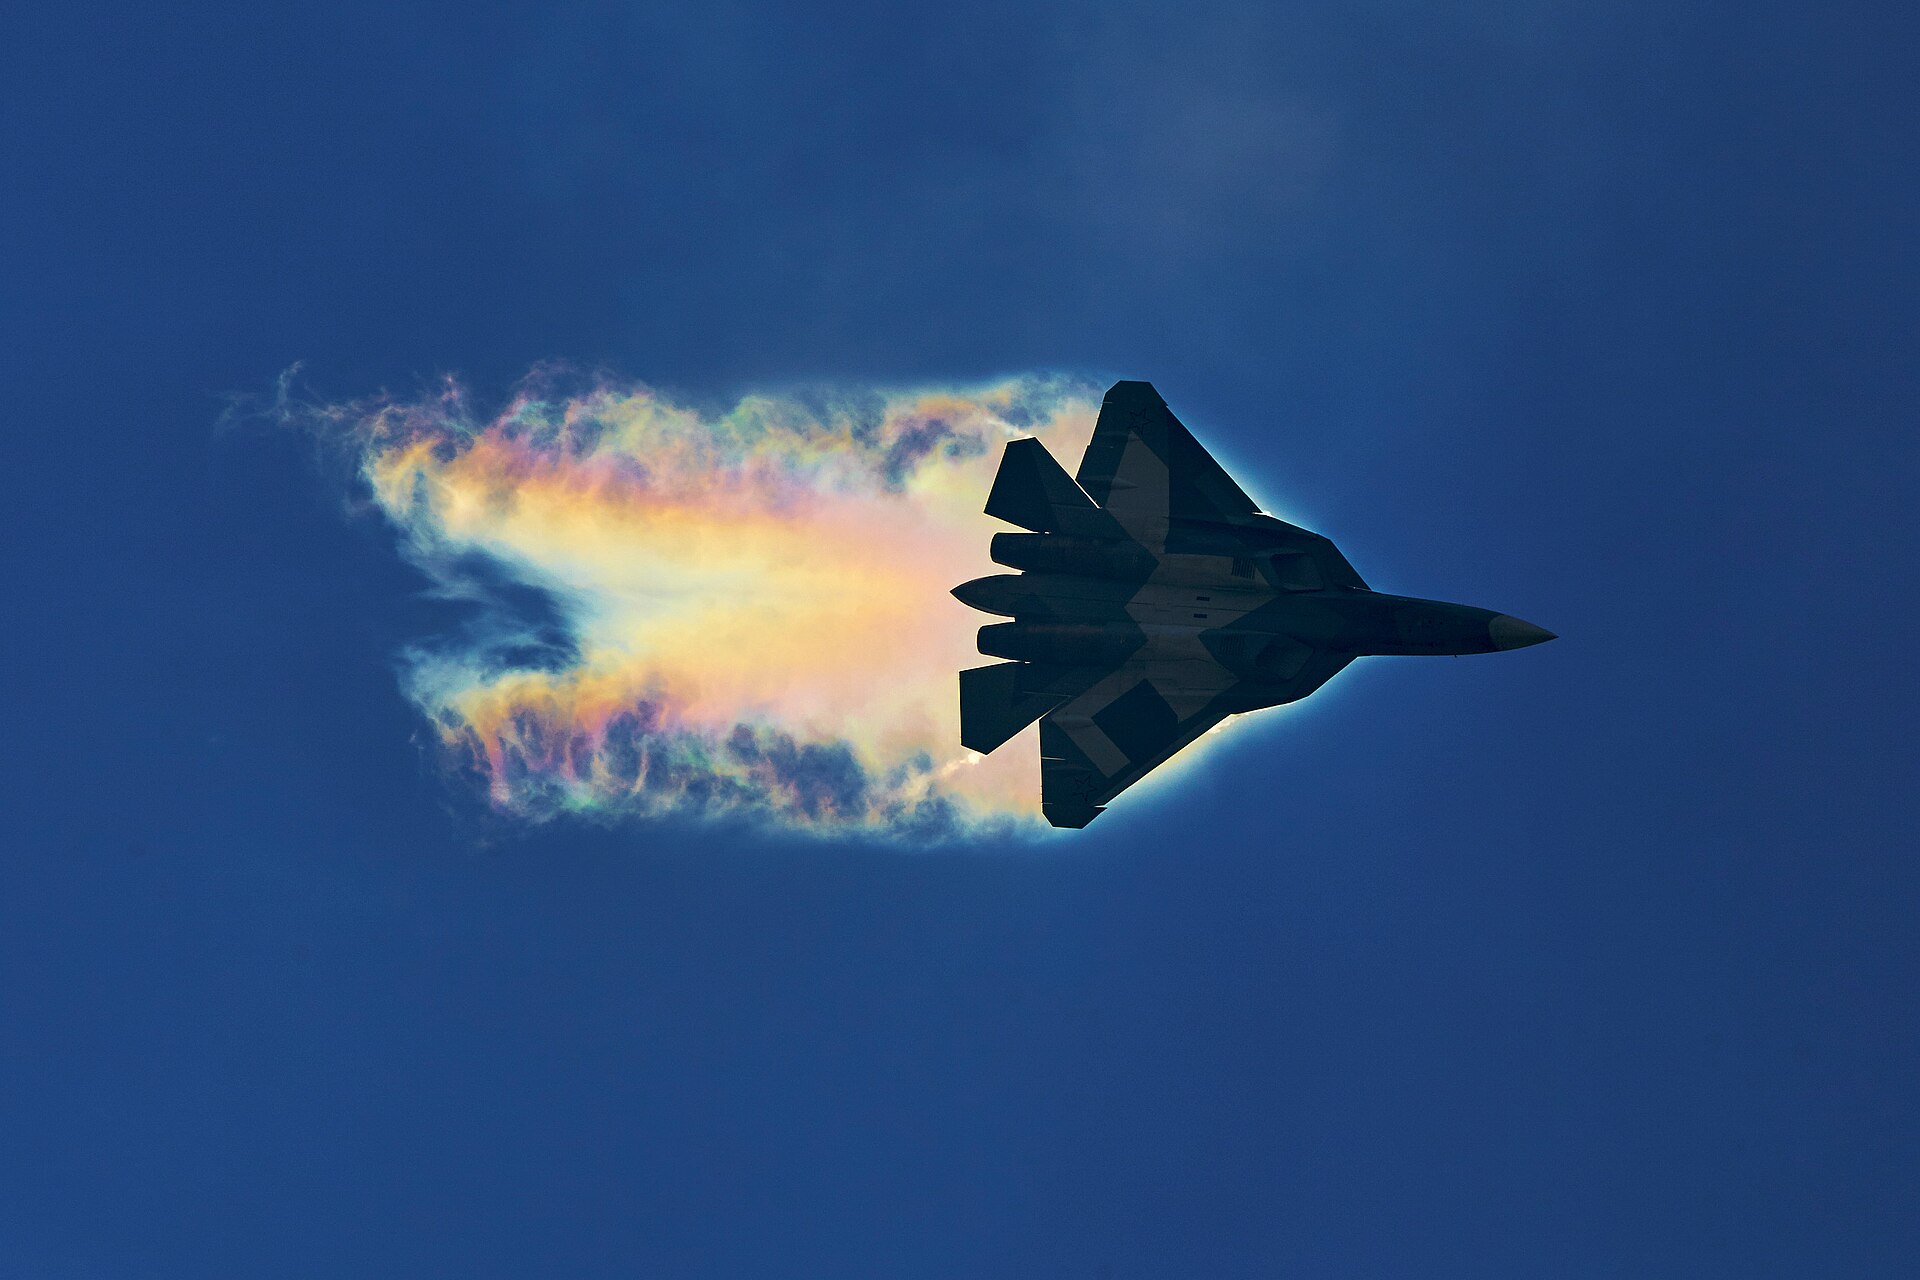 Sukhoi Su-57's stealth features, aerodynamic design, and integrated armament capabilities, showcasing its design innovations.